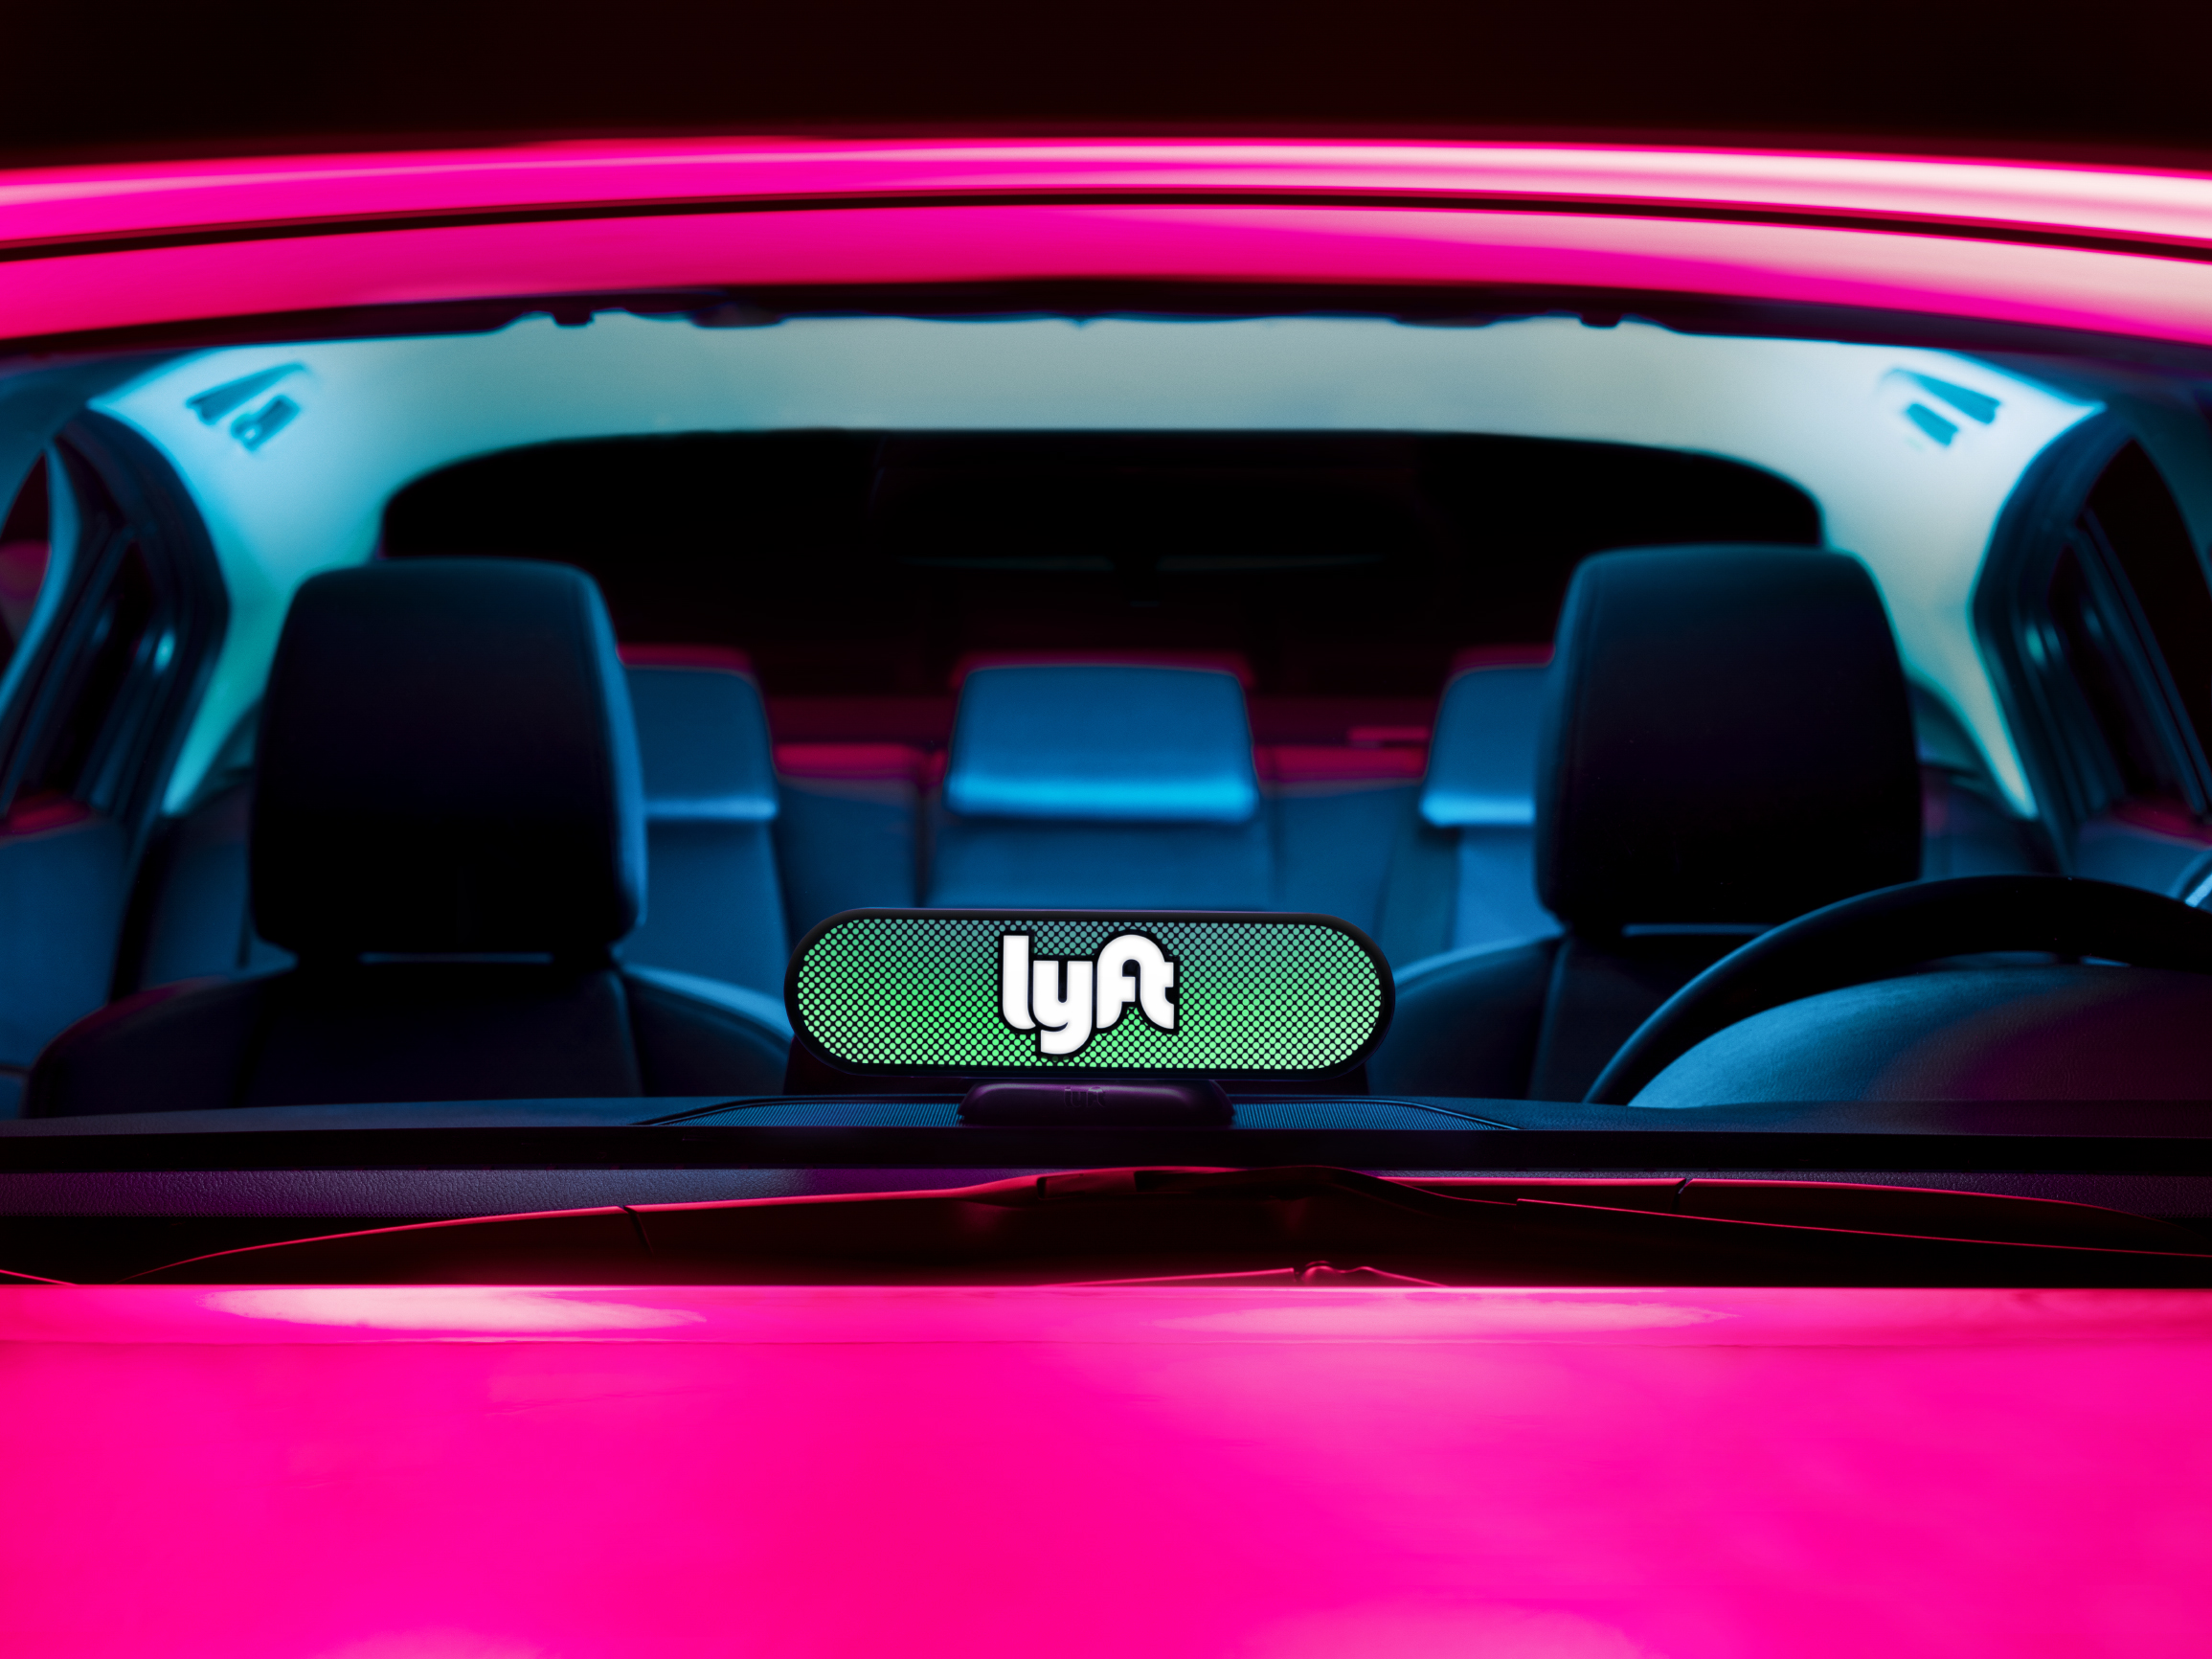 This photograph shows the view of the Amp device that passengers will have from outside the car. Personalized lighting displays will be used to help passengers and drivers connect on the street. (Courtesy of Lyft)